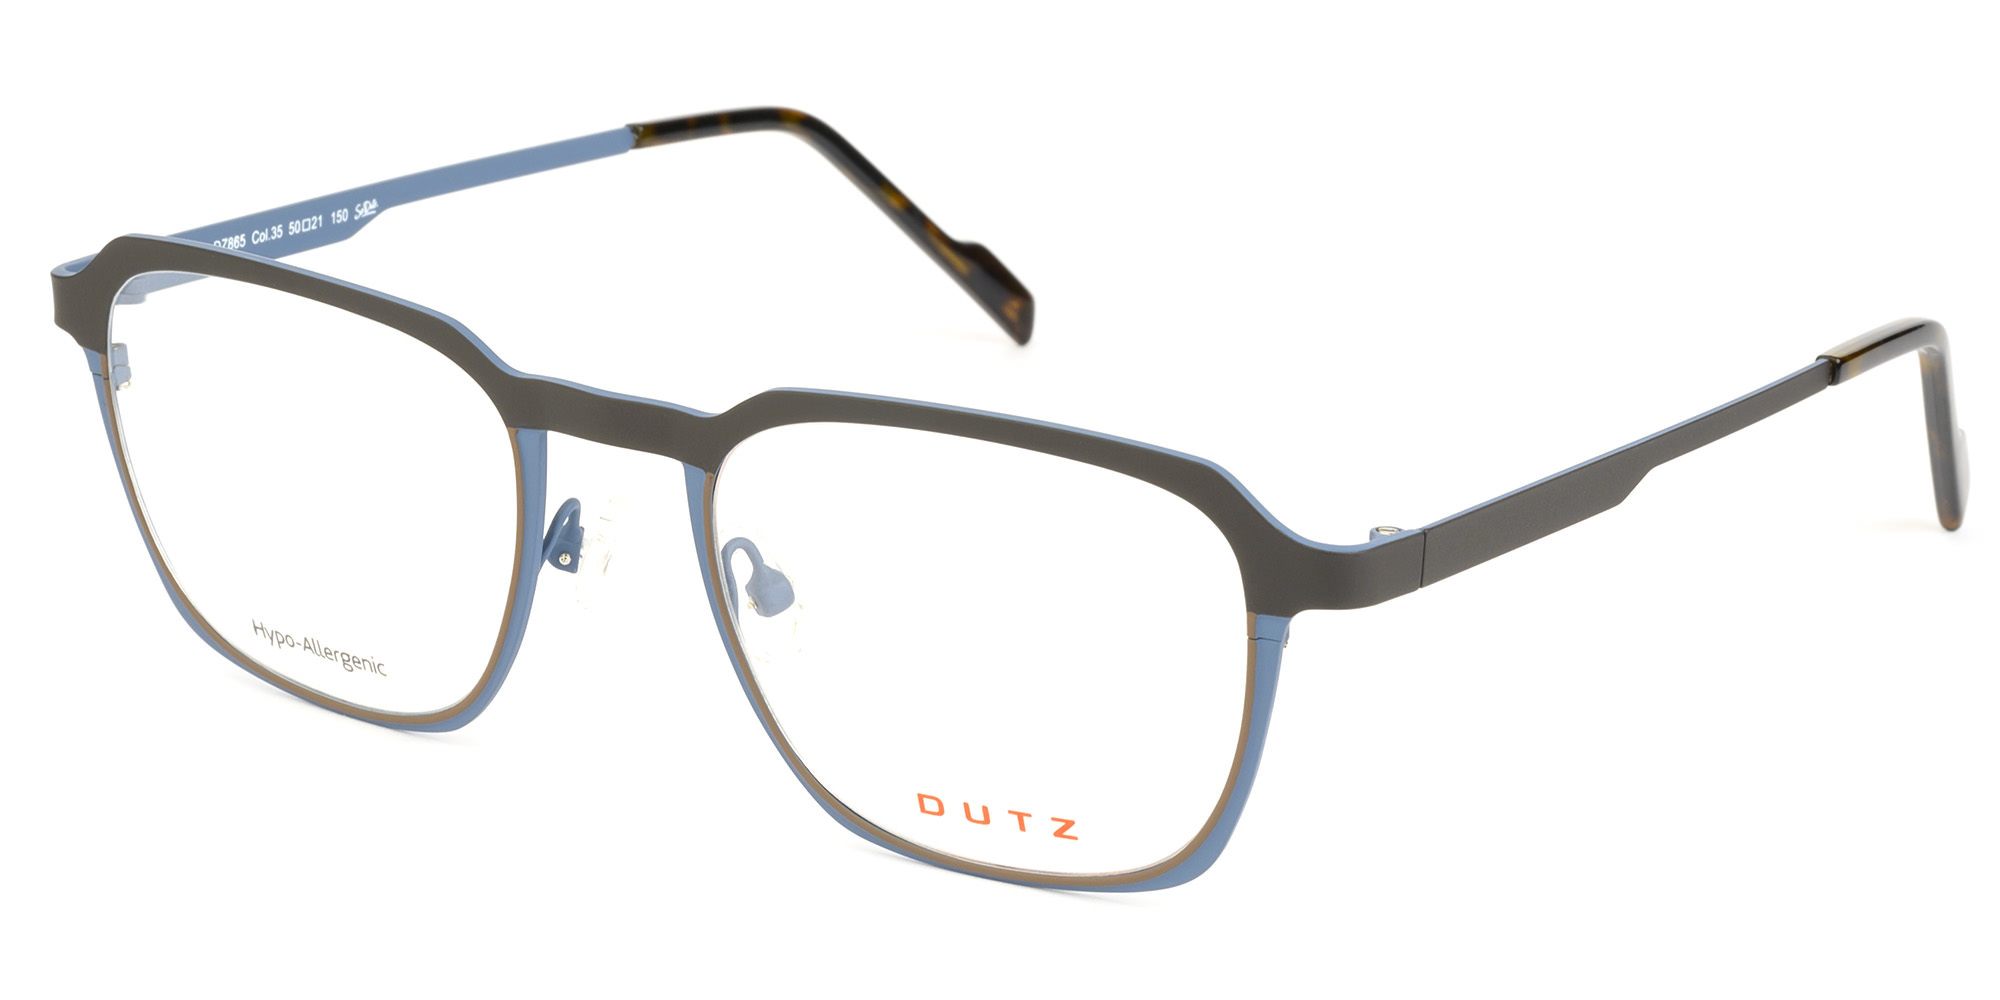 A modern, tricolor, brown-blue-camel, metallic frame and temples with brown tartaruga acetate temple tips